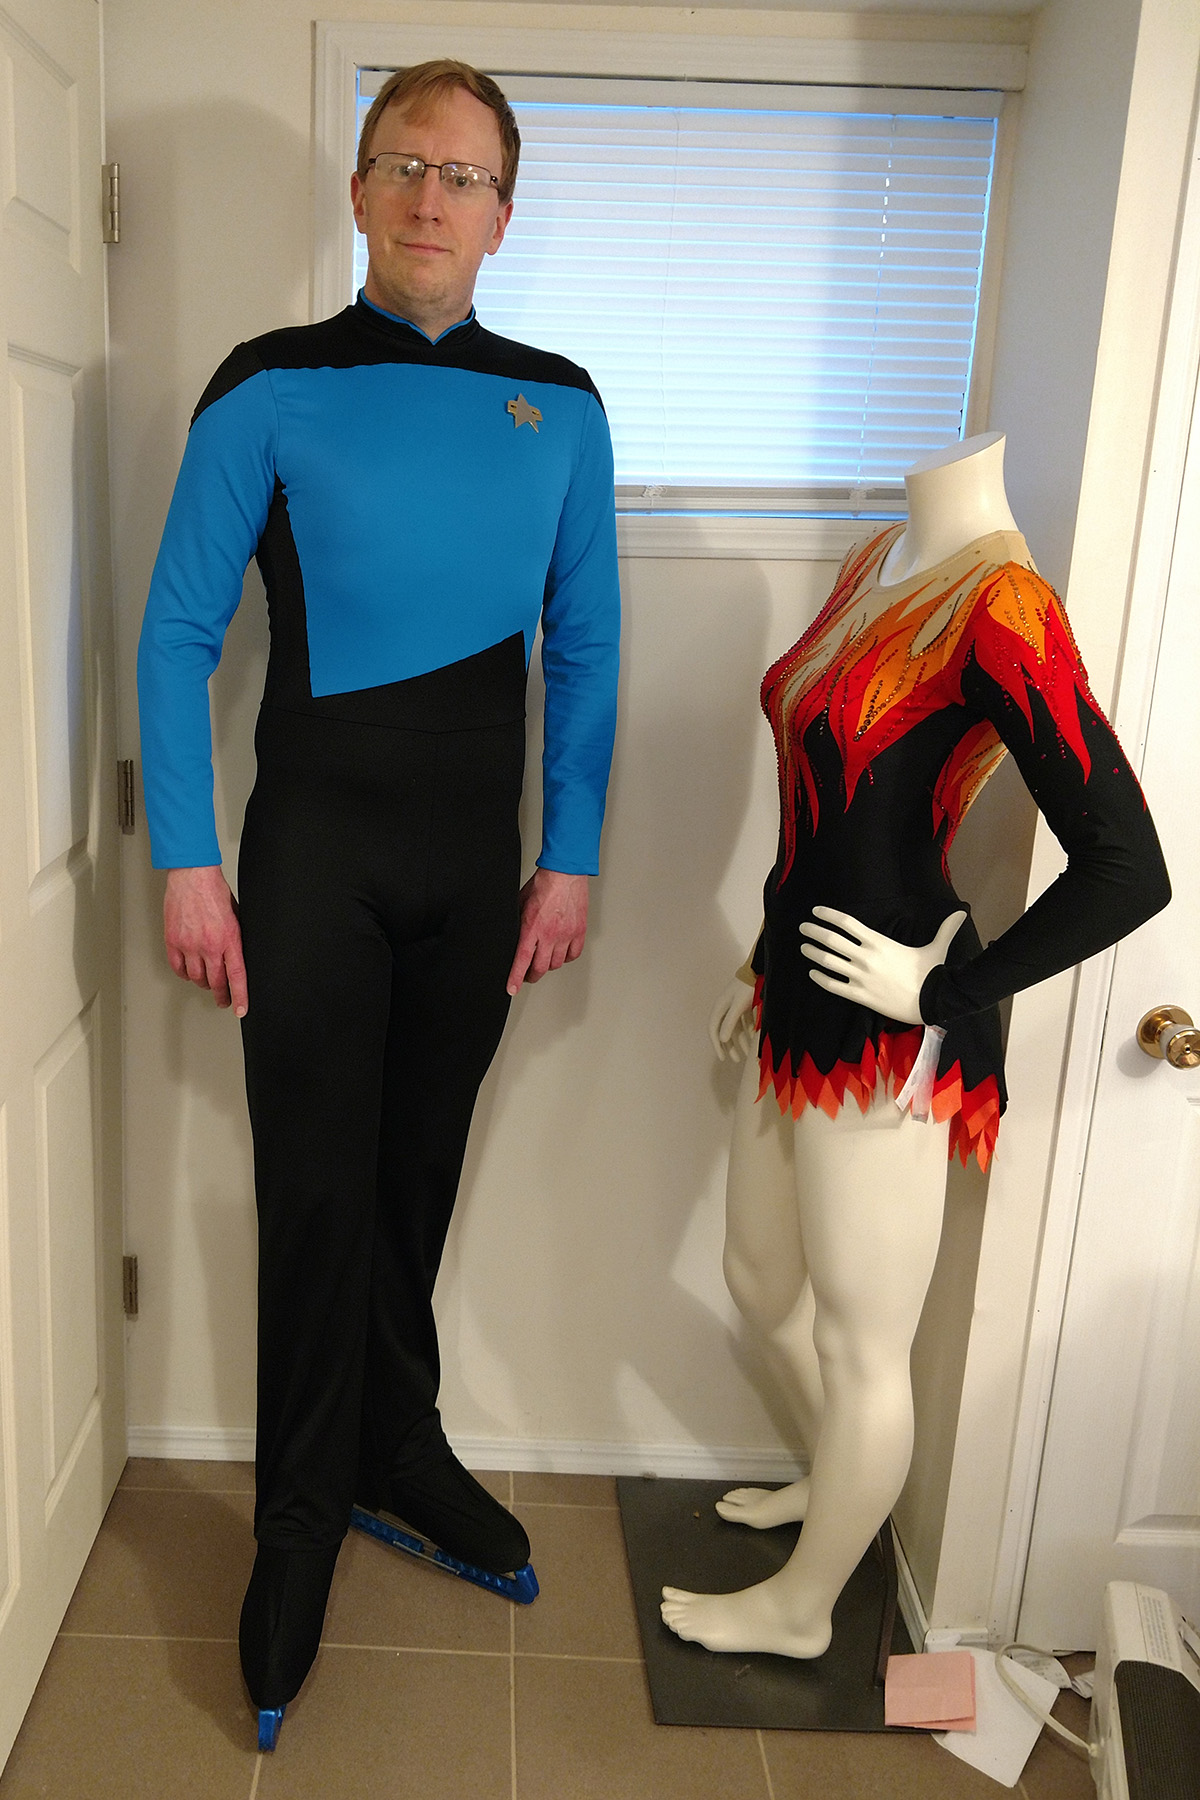 A blond man wearing a 1 piece figure skating costume that looks like a Star Trek The Next Generation science officer uniform.